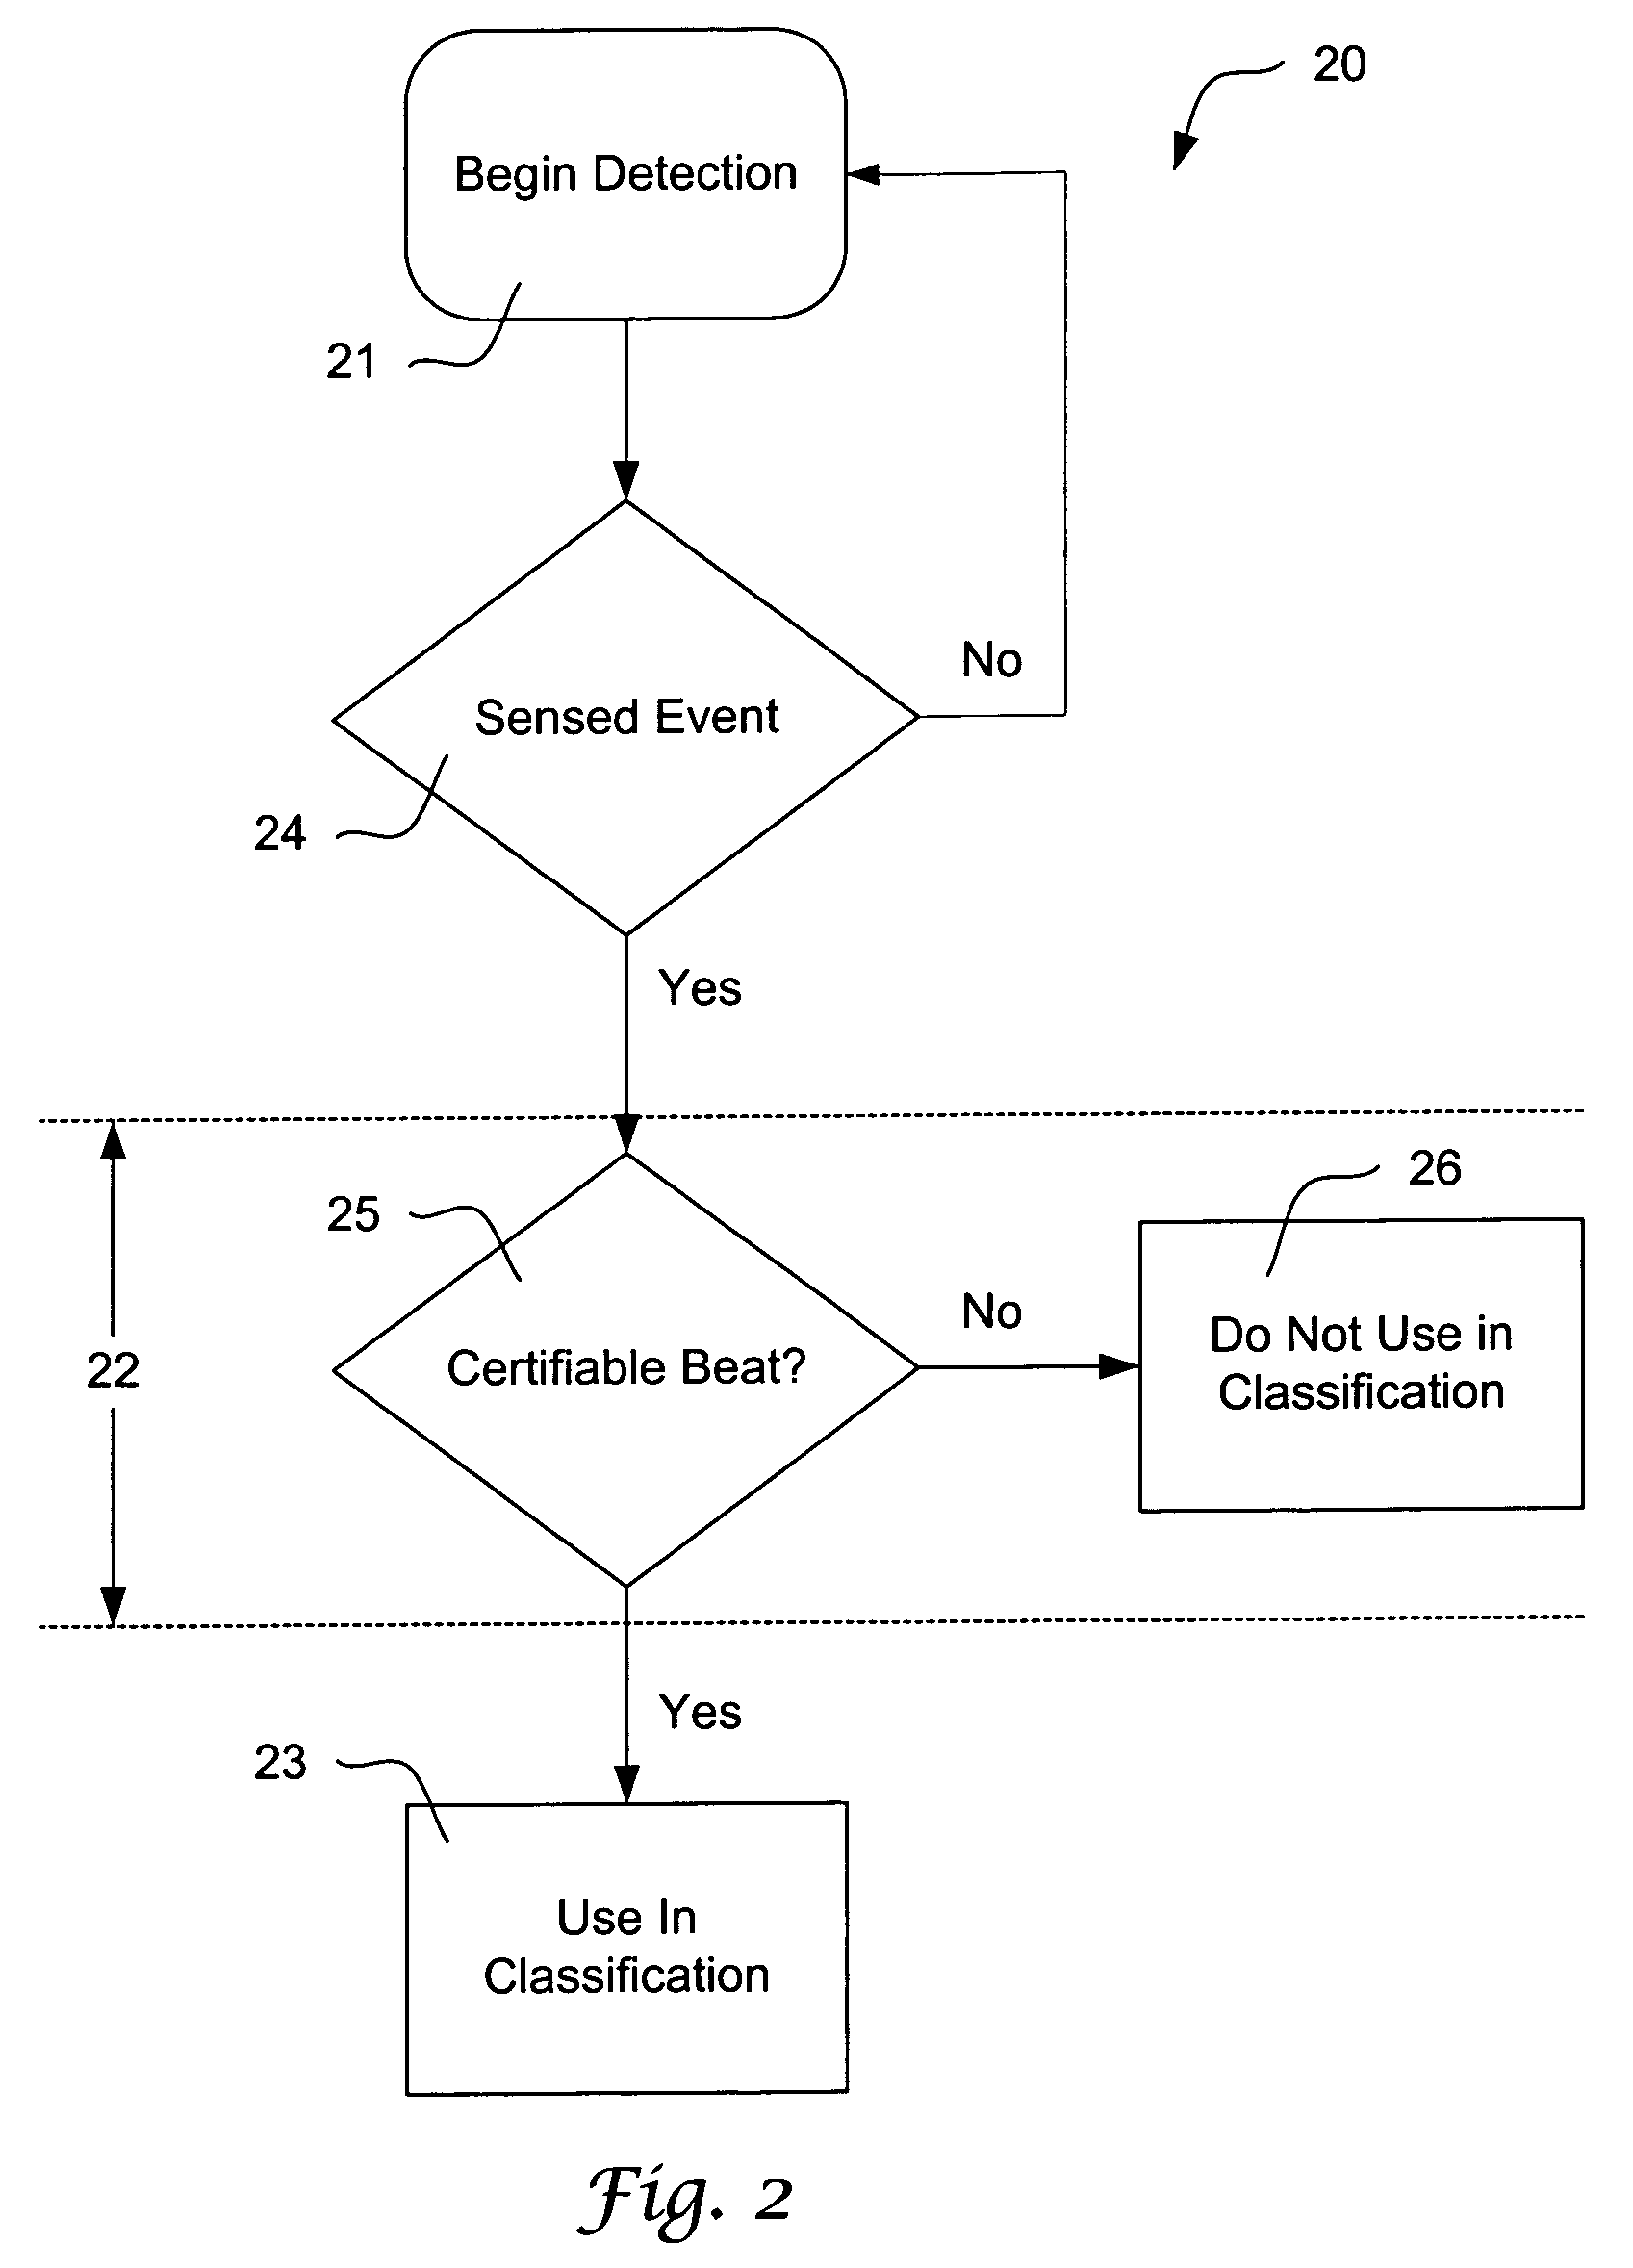 Method and devices for performing cardiac waveform appraisal